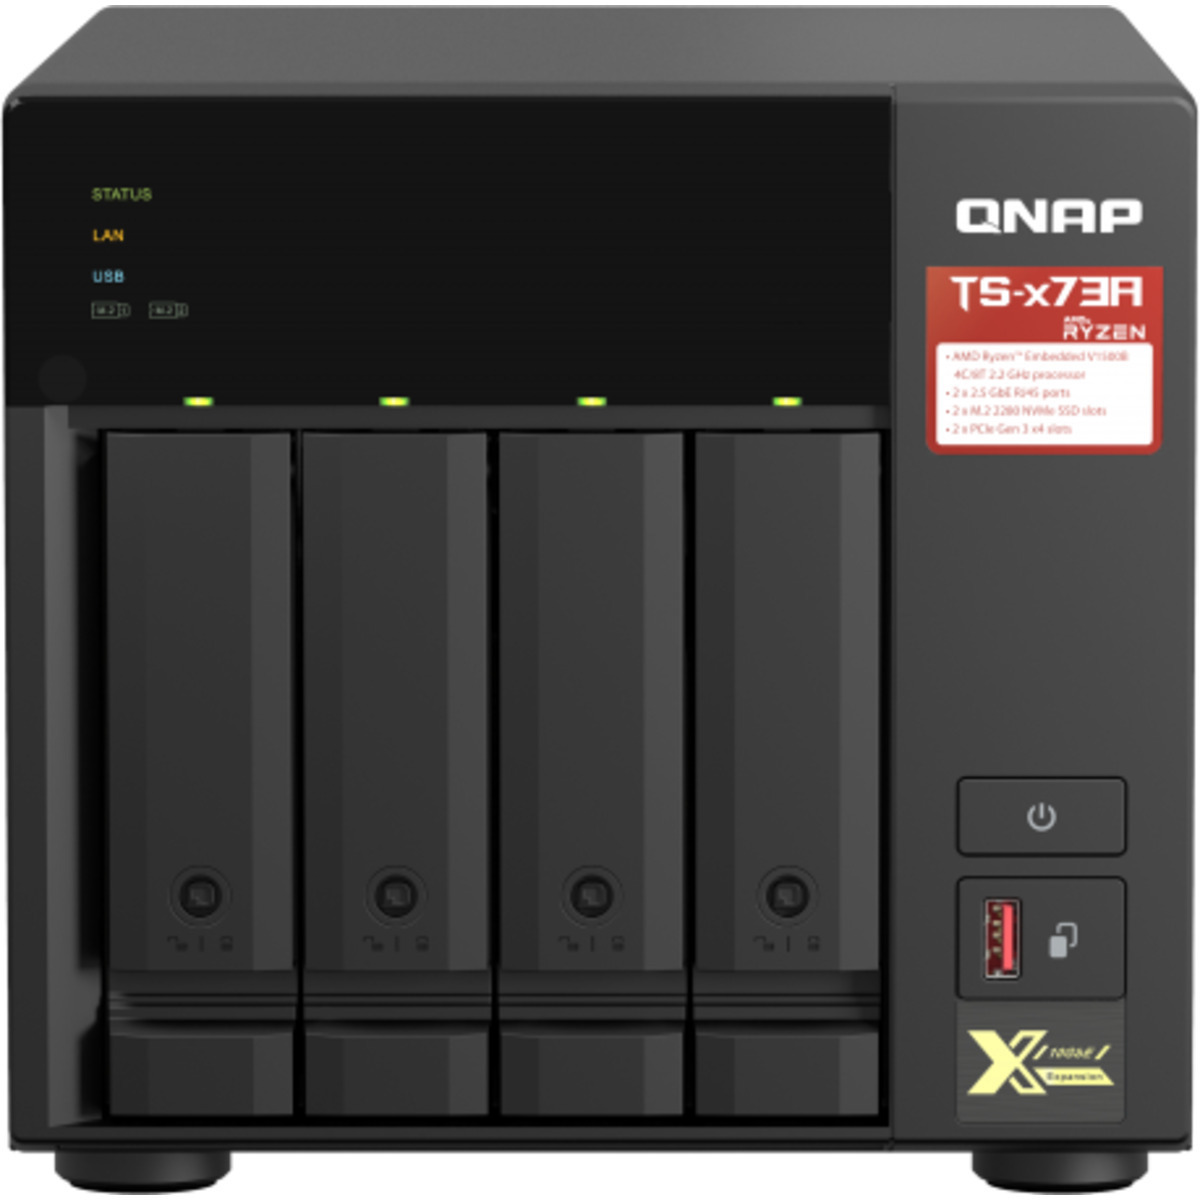 buy $1182 QNAP TS-473A 8tb Desktop NAS - Network Attached Storage Device 4x2000gb Seagate BarraCuda ST2000DM008 3.5 7200rpm SATA 6Gb/s HDD CONSUMER Class Drives Installed - Burn-In Tested - ON SALE - nas headquarters buy network attached storage server device das new raid-5 free shipping usa TS-473A